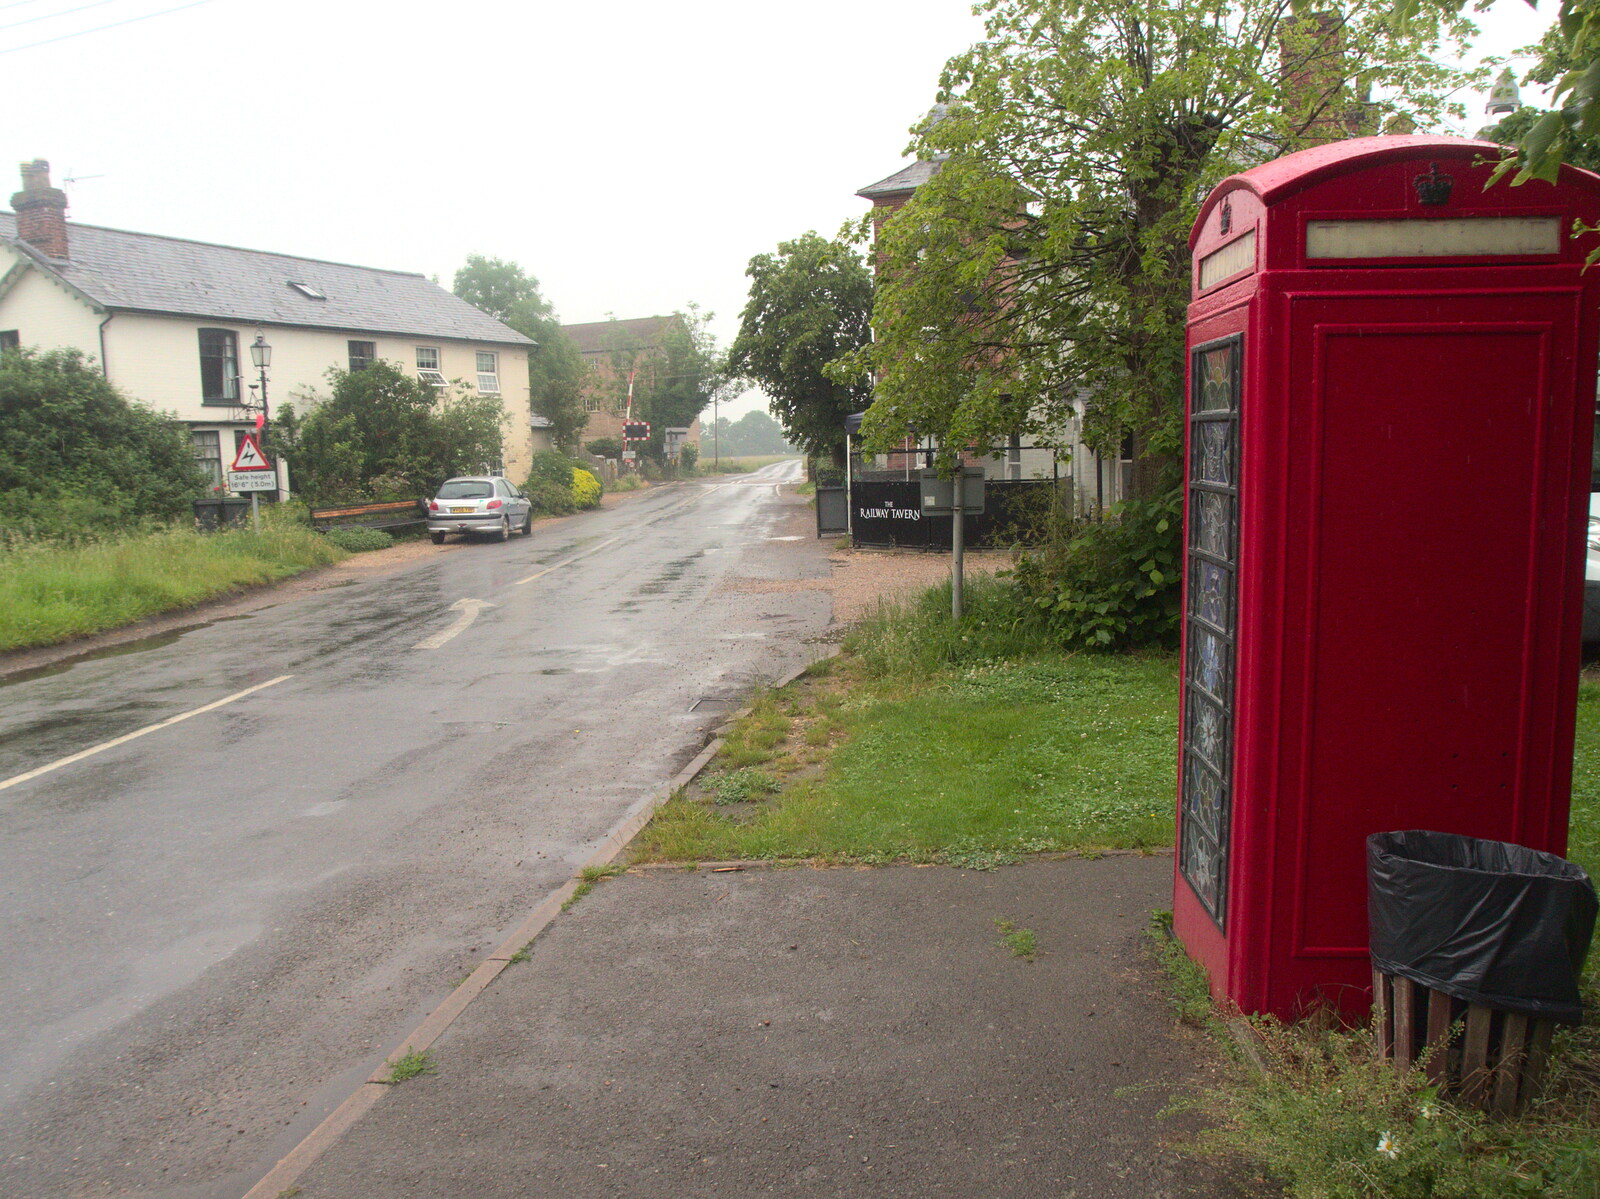 A K6 phone box in the lashing rain from A BSCC Ride to Pulham Market, Norfolk - 17th June 2021